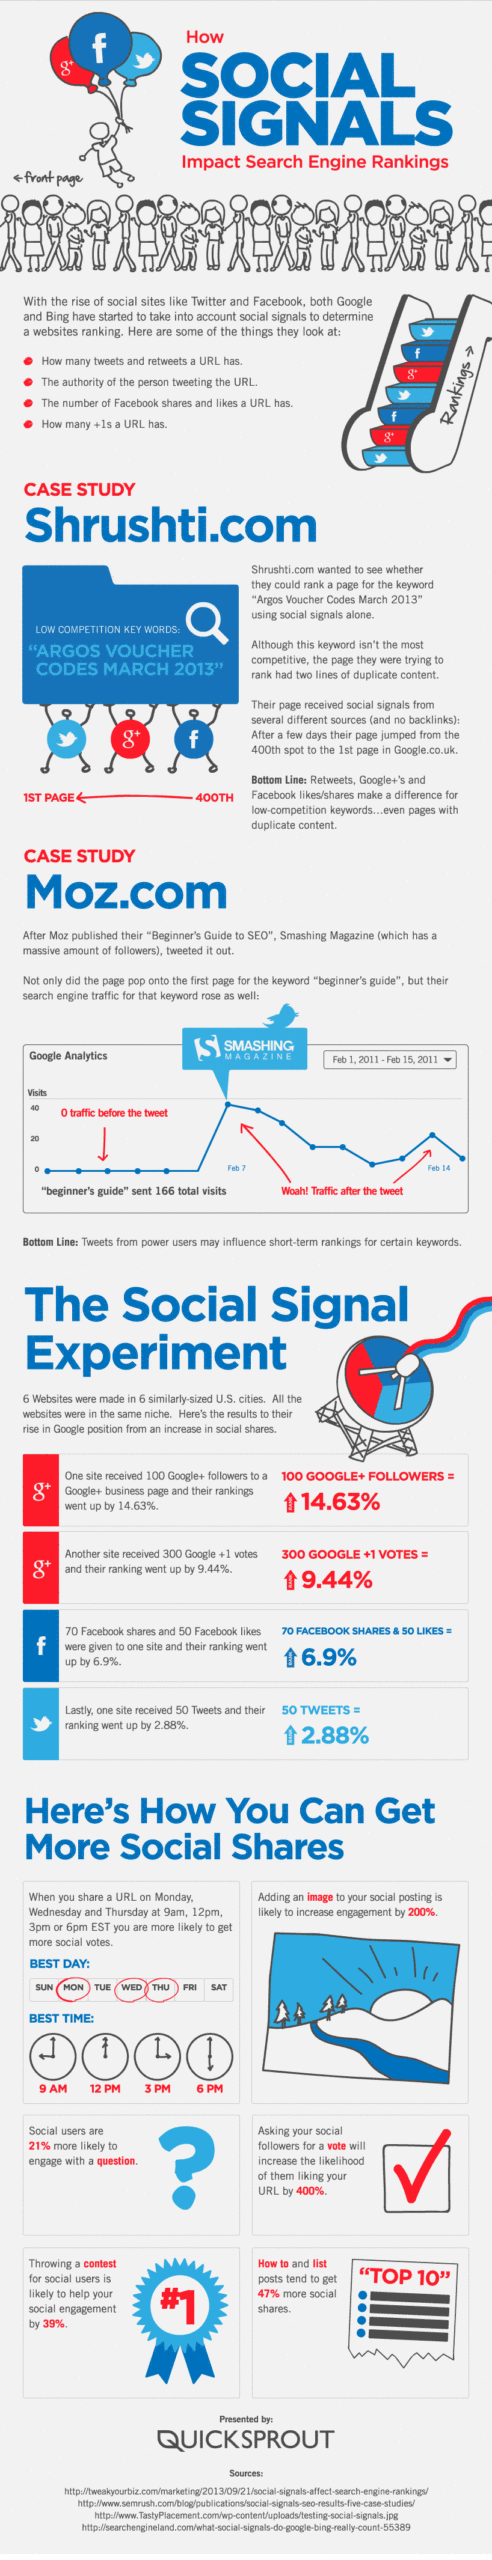 How Social Signals Impact Search Engine Rankings